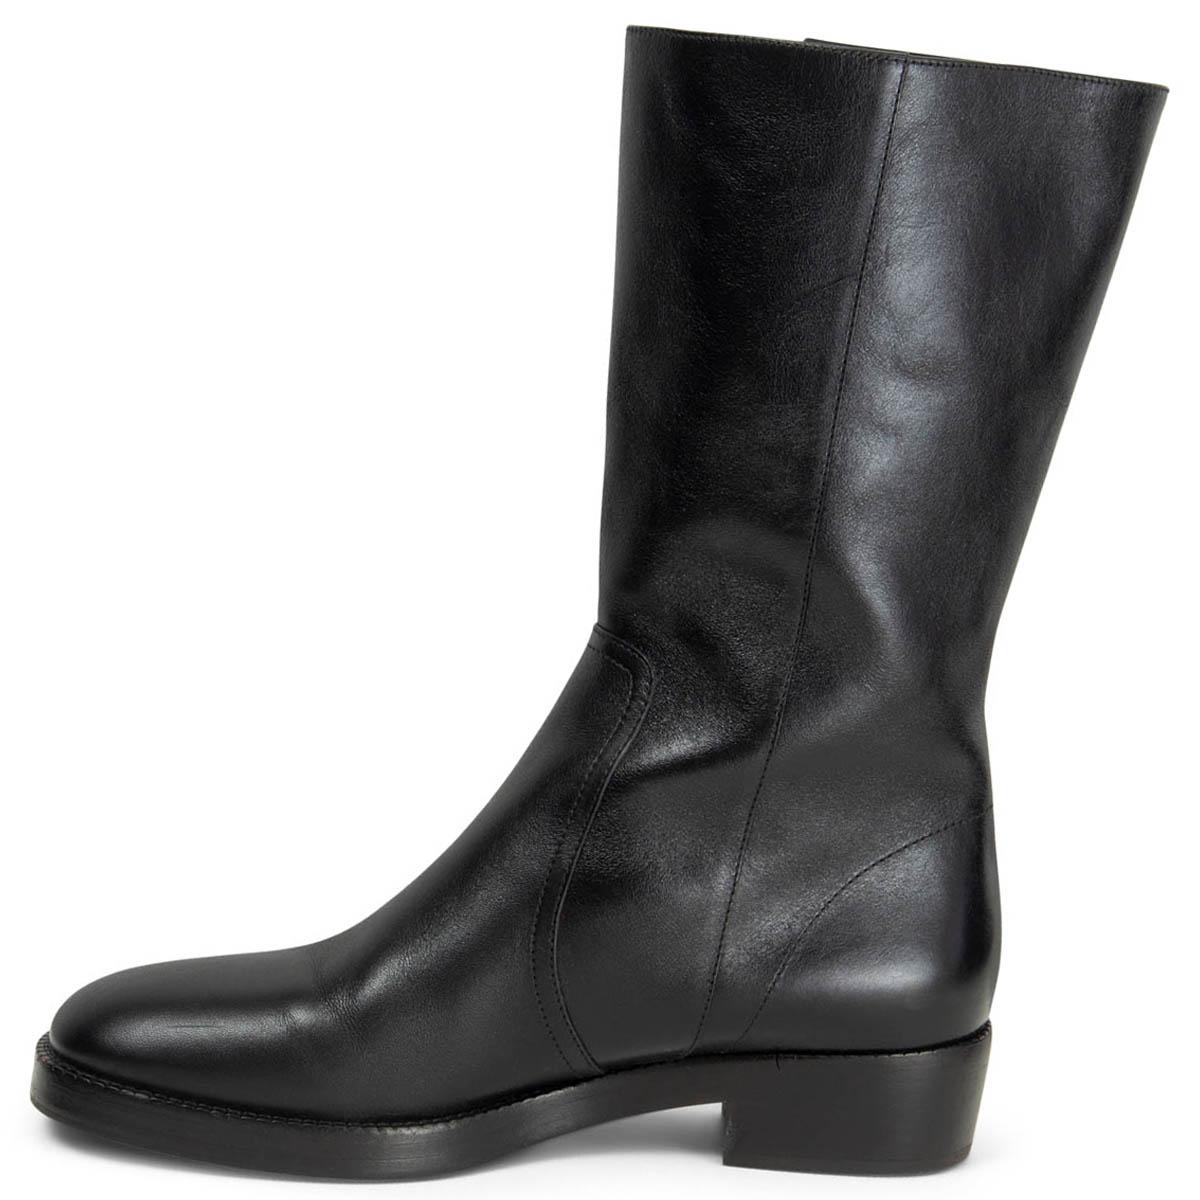 Women's CHRISTIAN DIOR black leather 2019 DIORODEO Riding Boots Shoes 39